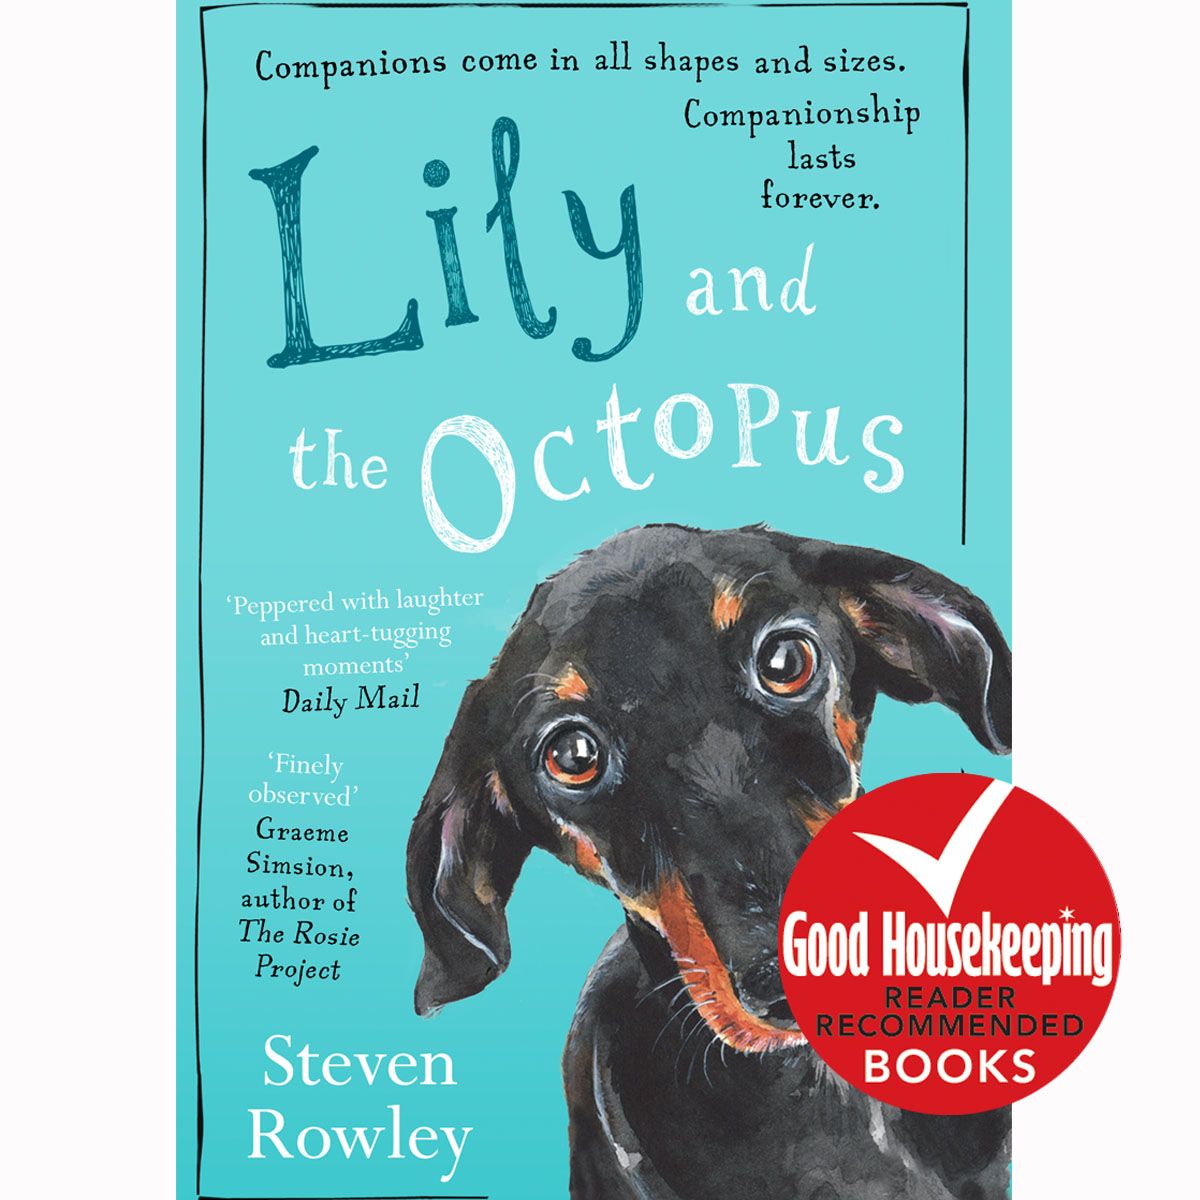 lily and the octopus by steven rowley